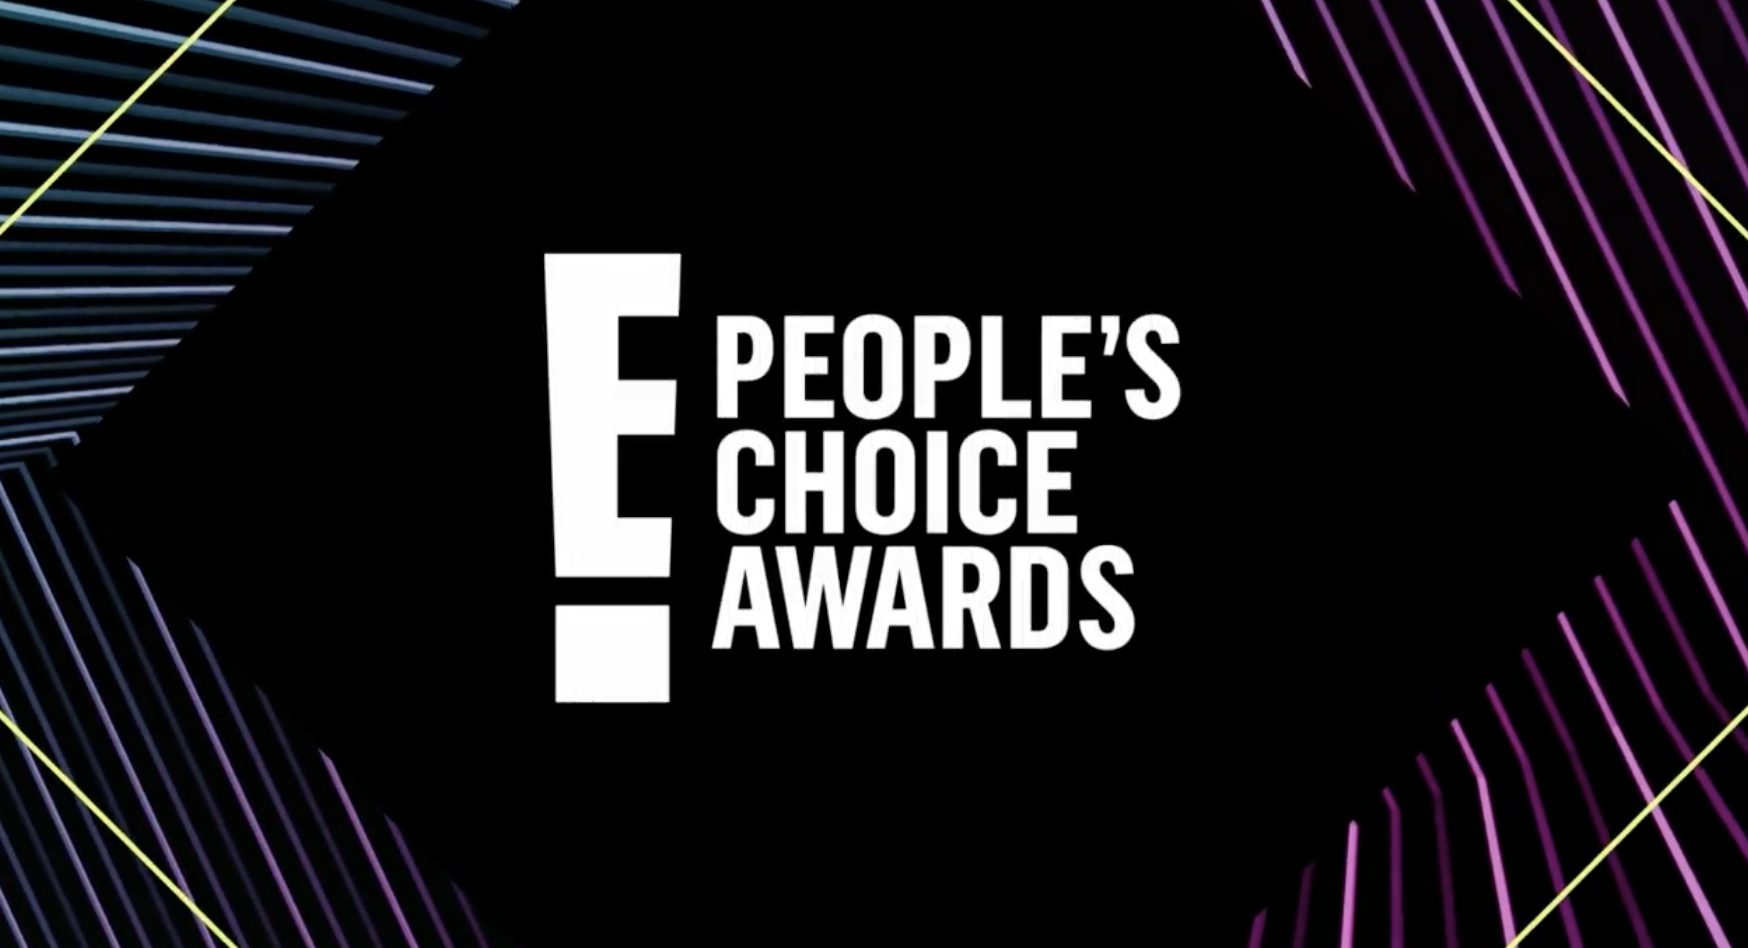 The 2018 People's Choice Awards will kick off at 9pm EST on 11 November, 2018.